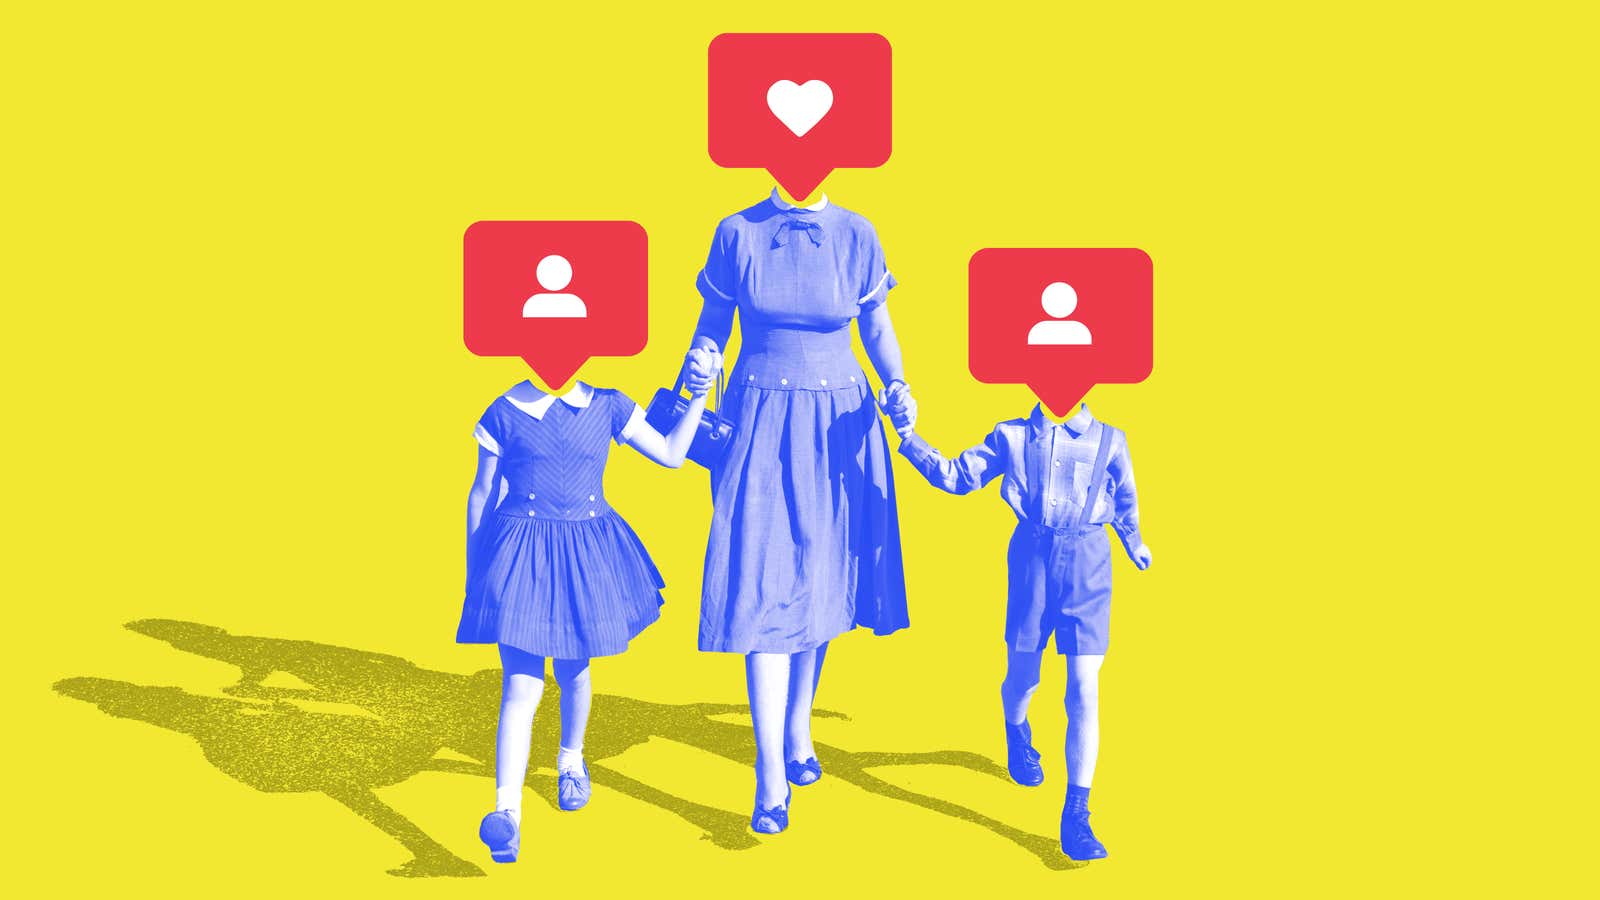 Do You Let Your Kids Follow You on Social Media?